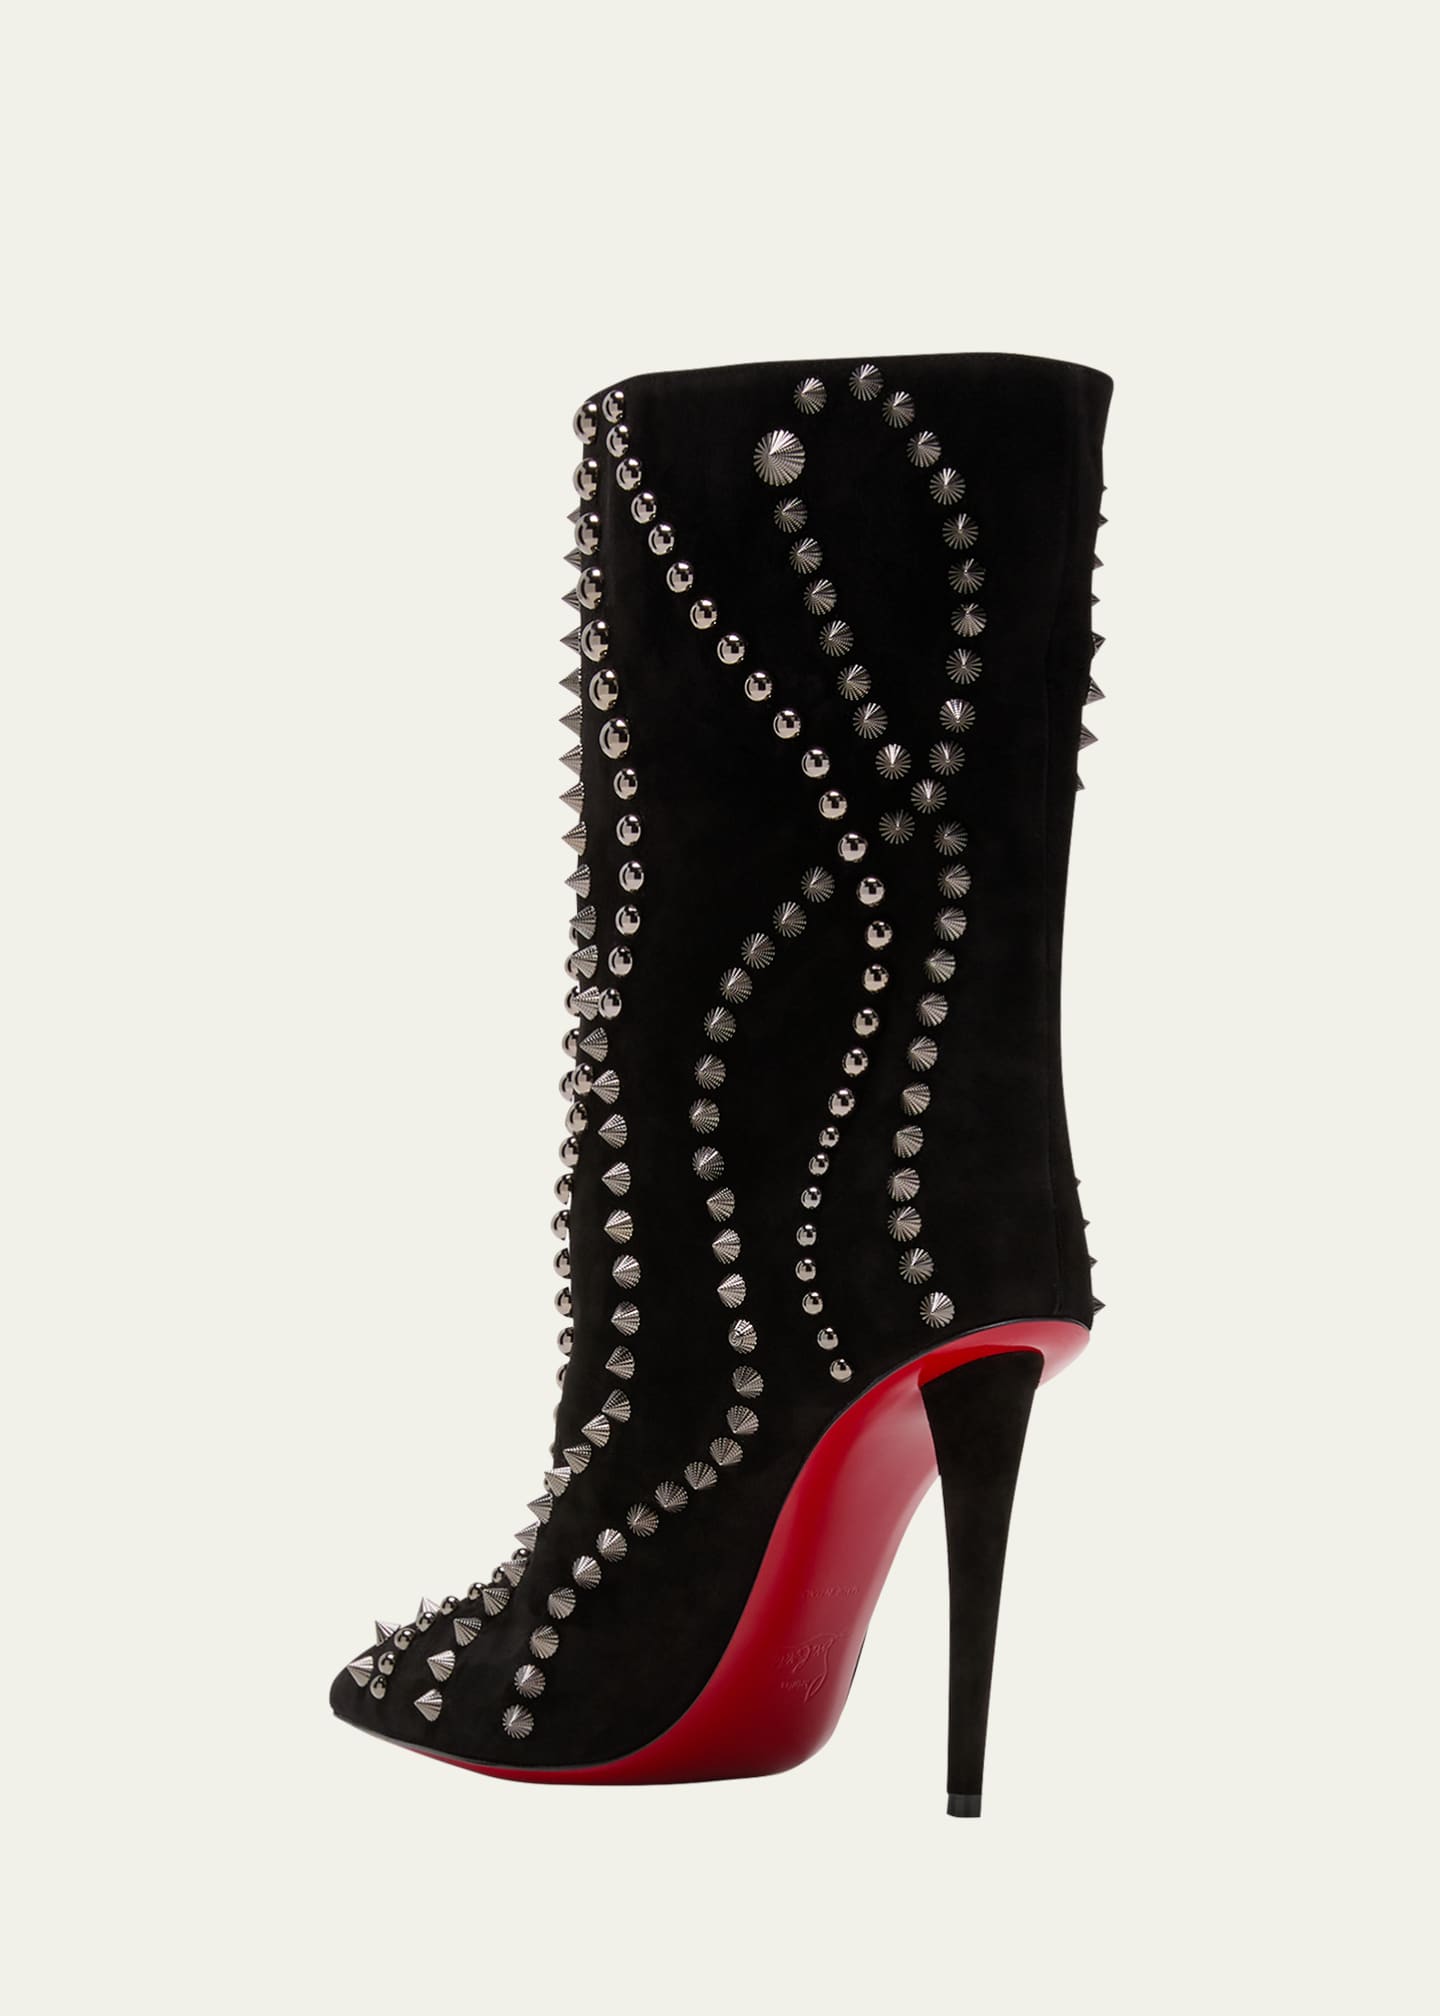 Christian Louboutin Astrilarge Pika Red Sole Suede Spike Booties ...